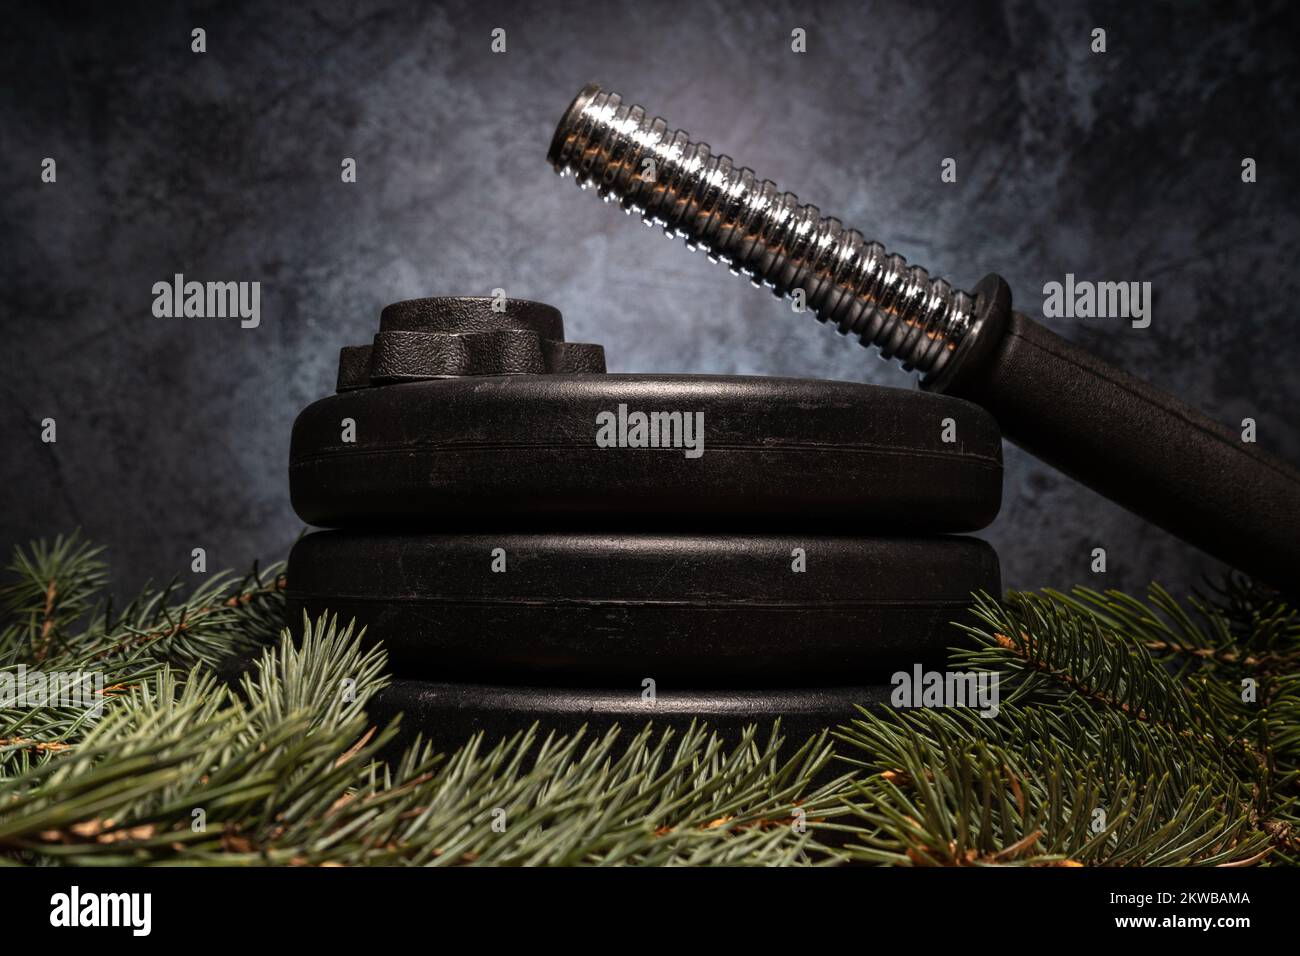 Dumbbell barbell weight plates and Christmas tree branches. Fitness holiday season winter composition. Gym workout and sport training concept. Stock Photo